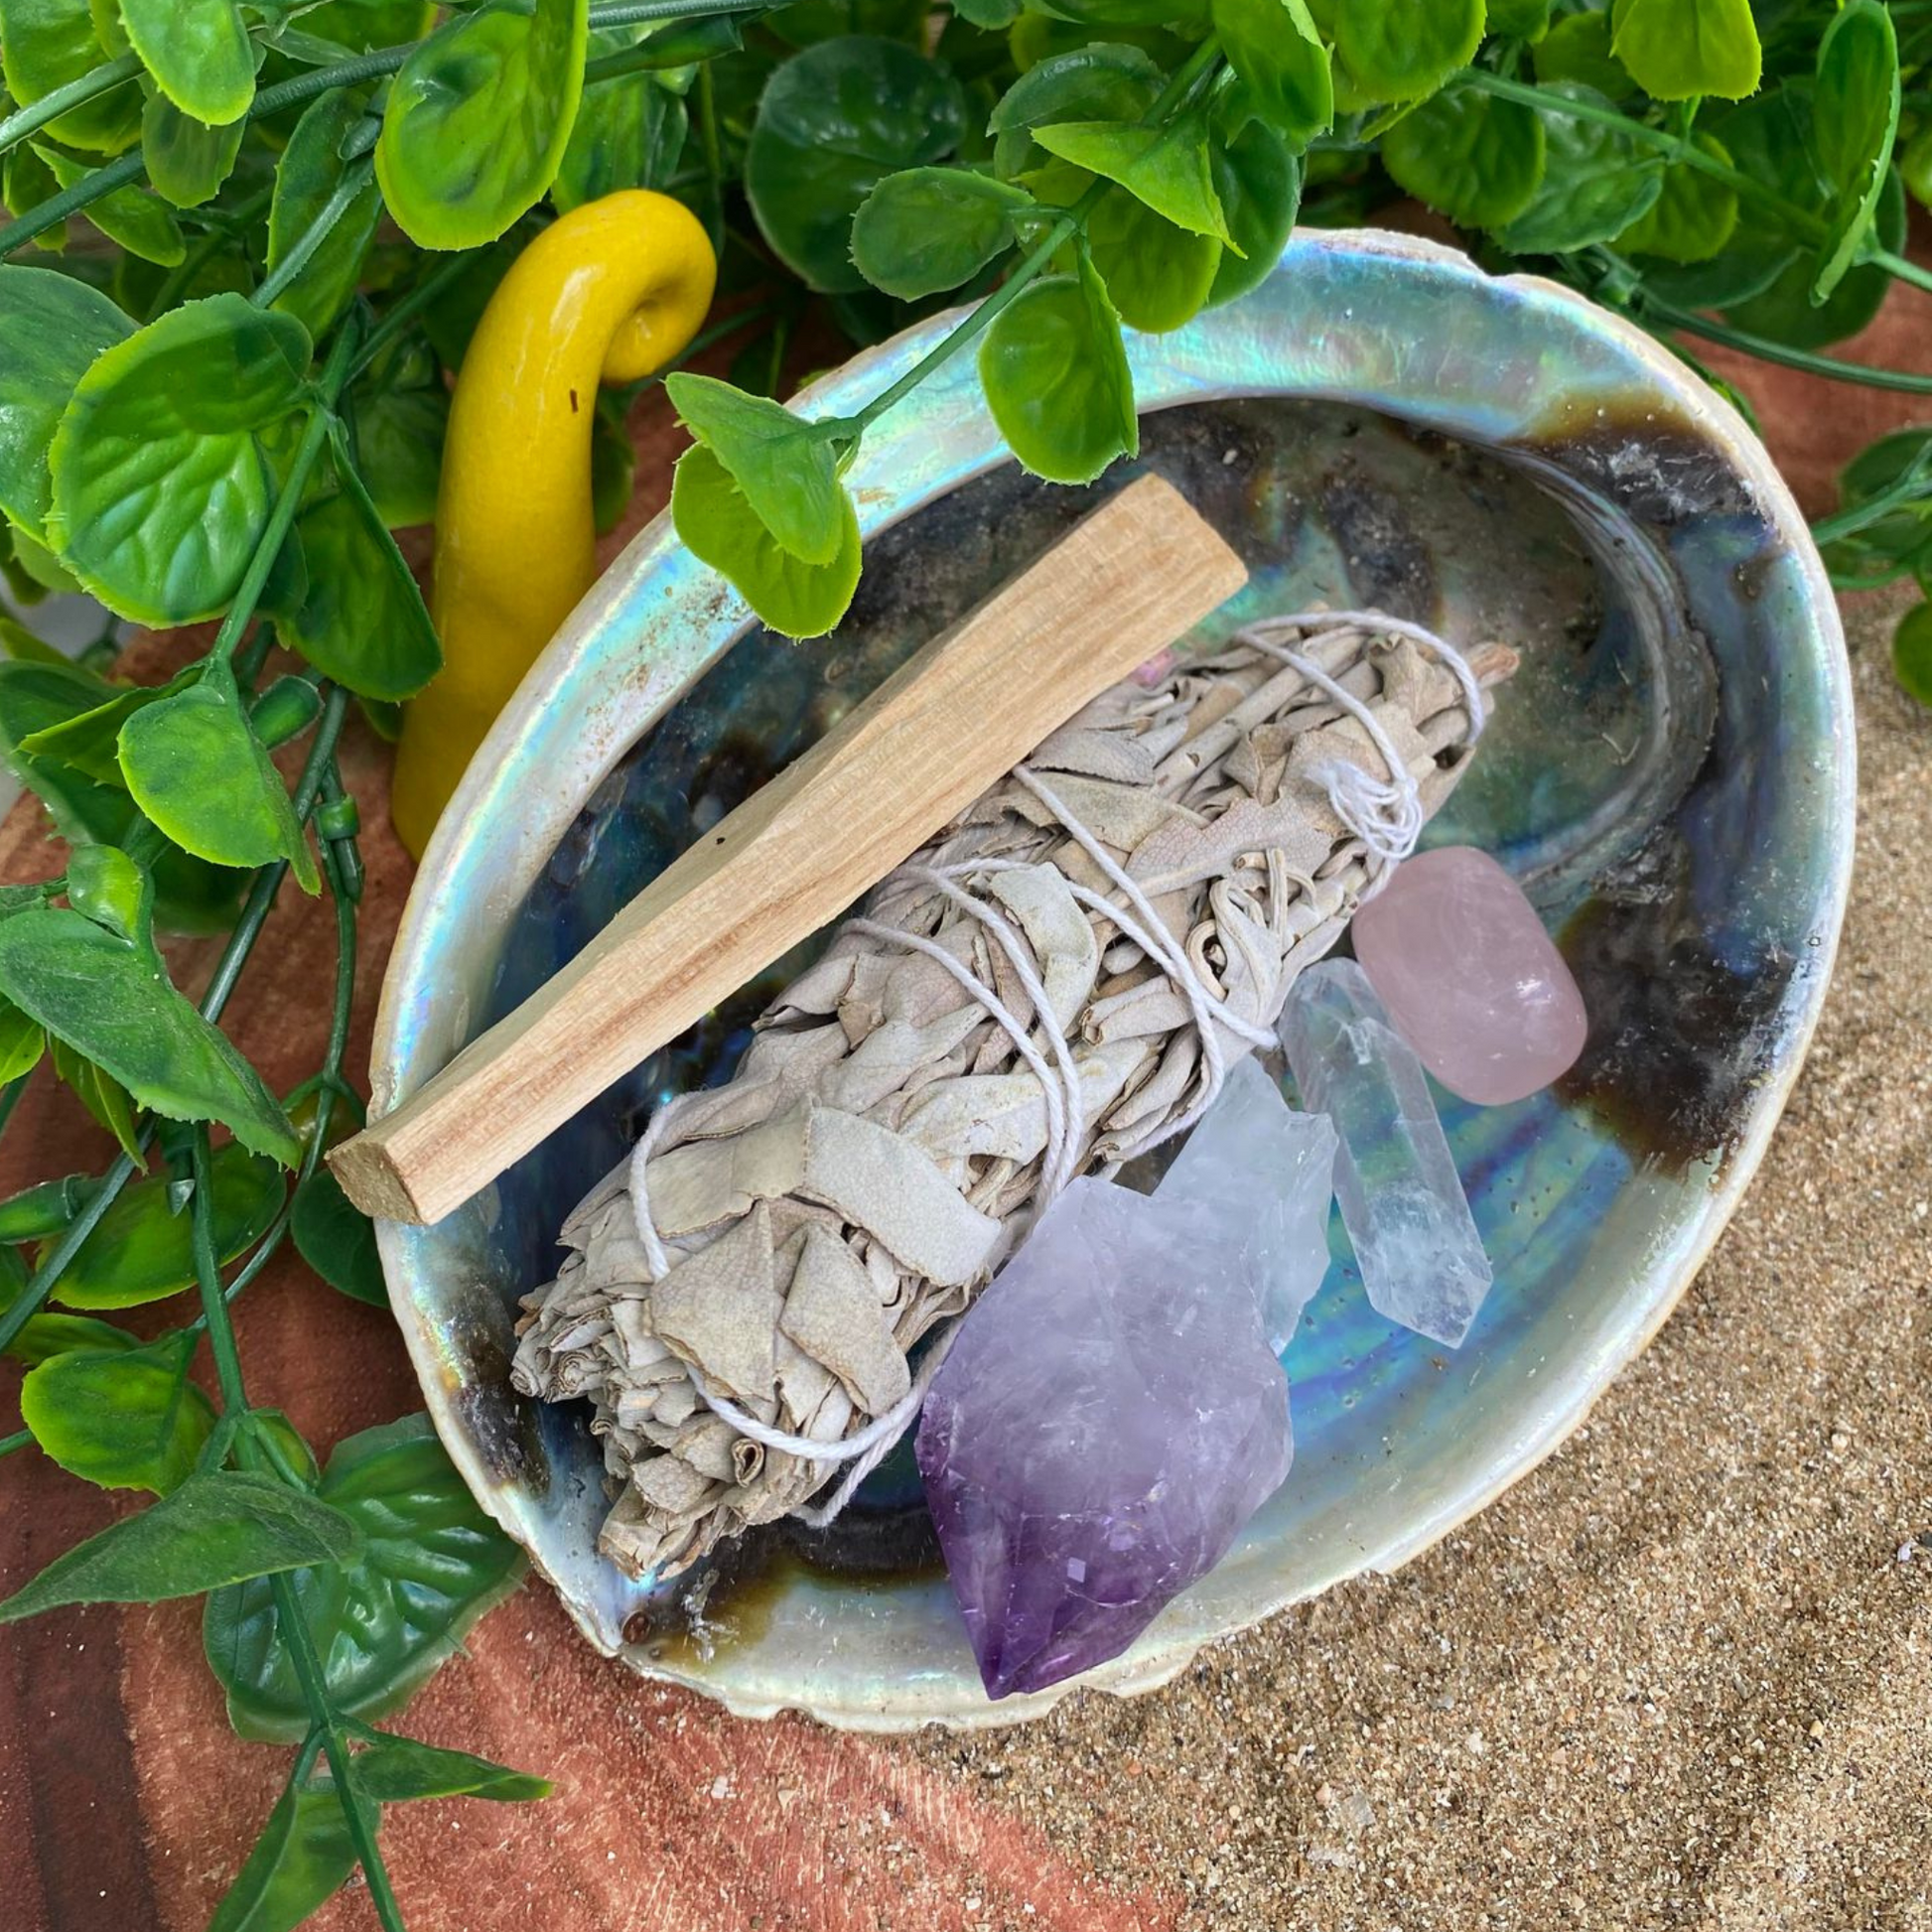 Amethyst Point, Clear Quartz Crystal Point, Rose Quartz Tumbled Stone, Palo Santo, Sage Smudge stick and Natural Abalone Shell